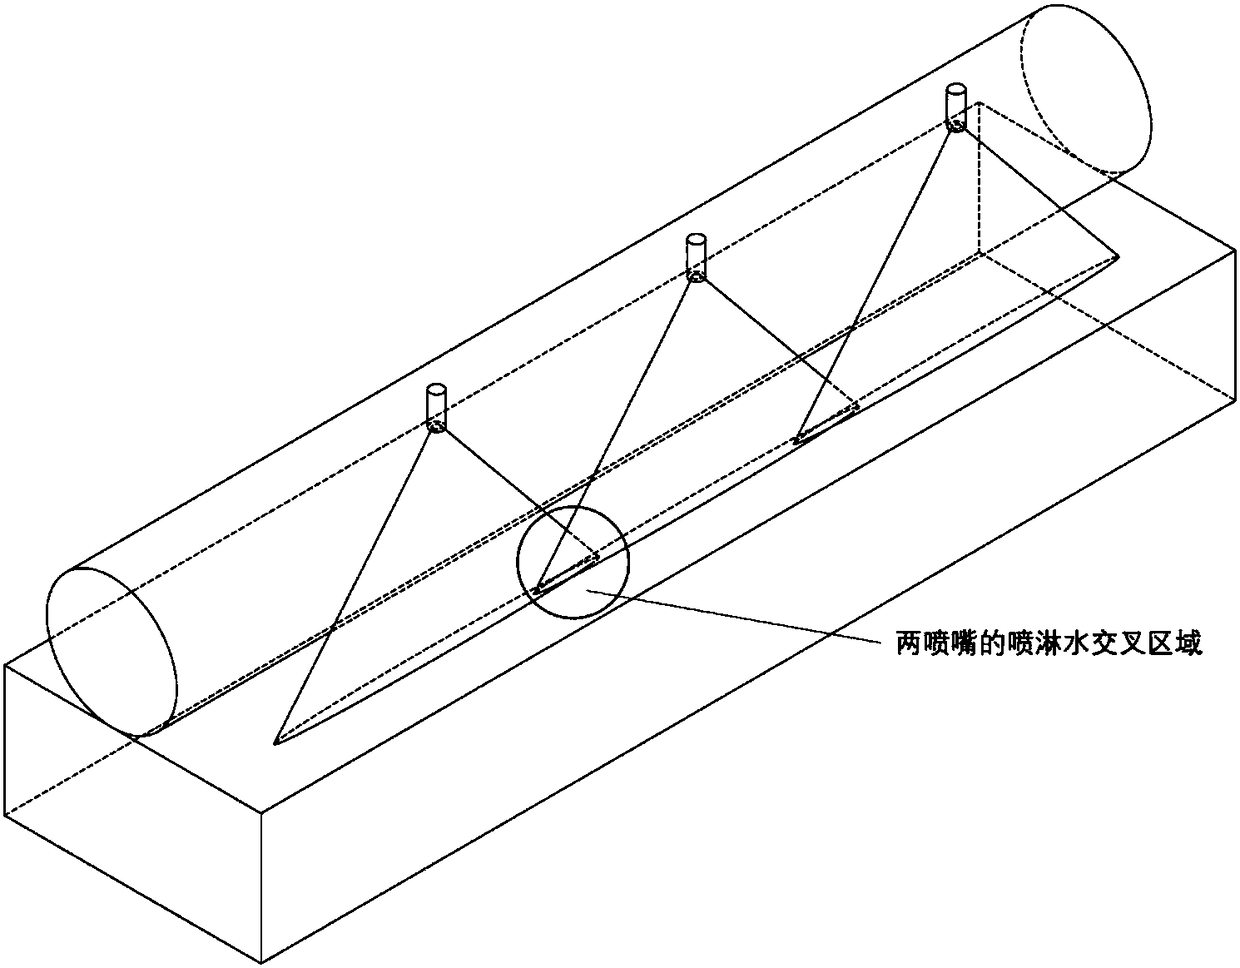 Continuous casting spraying and cooling device